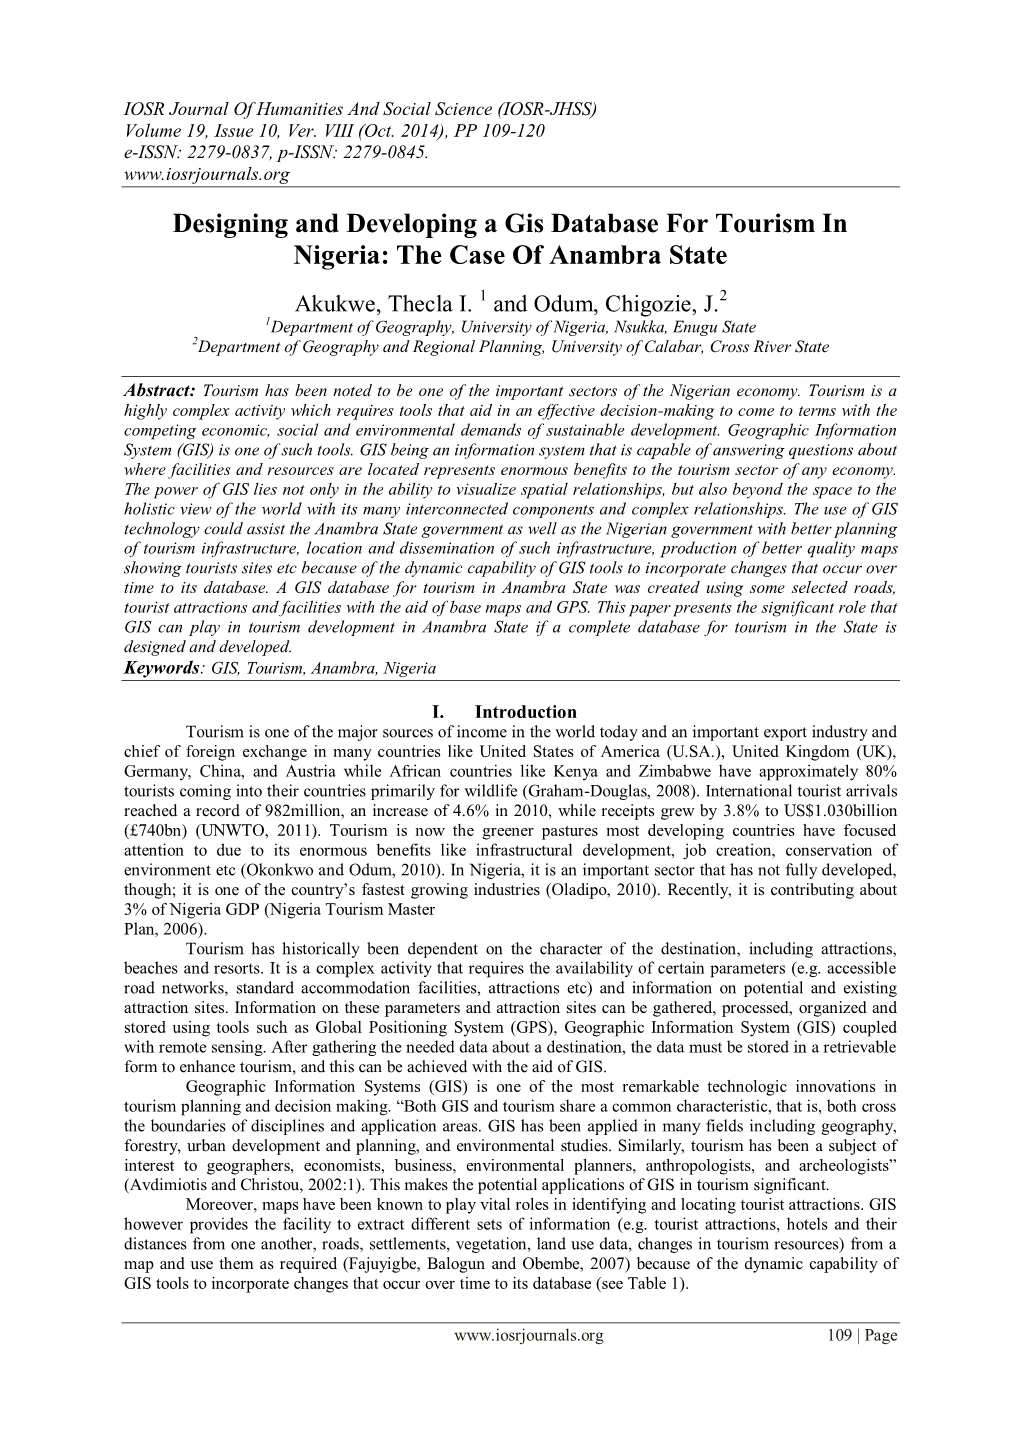 Designing and Developing a Gis Database for Tourism in Nigeria: the Case of Anambra State